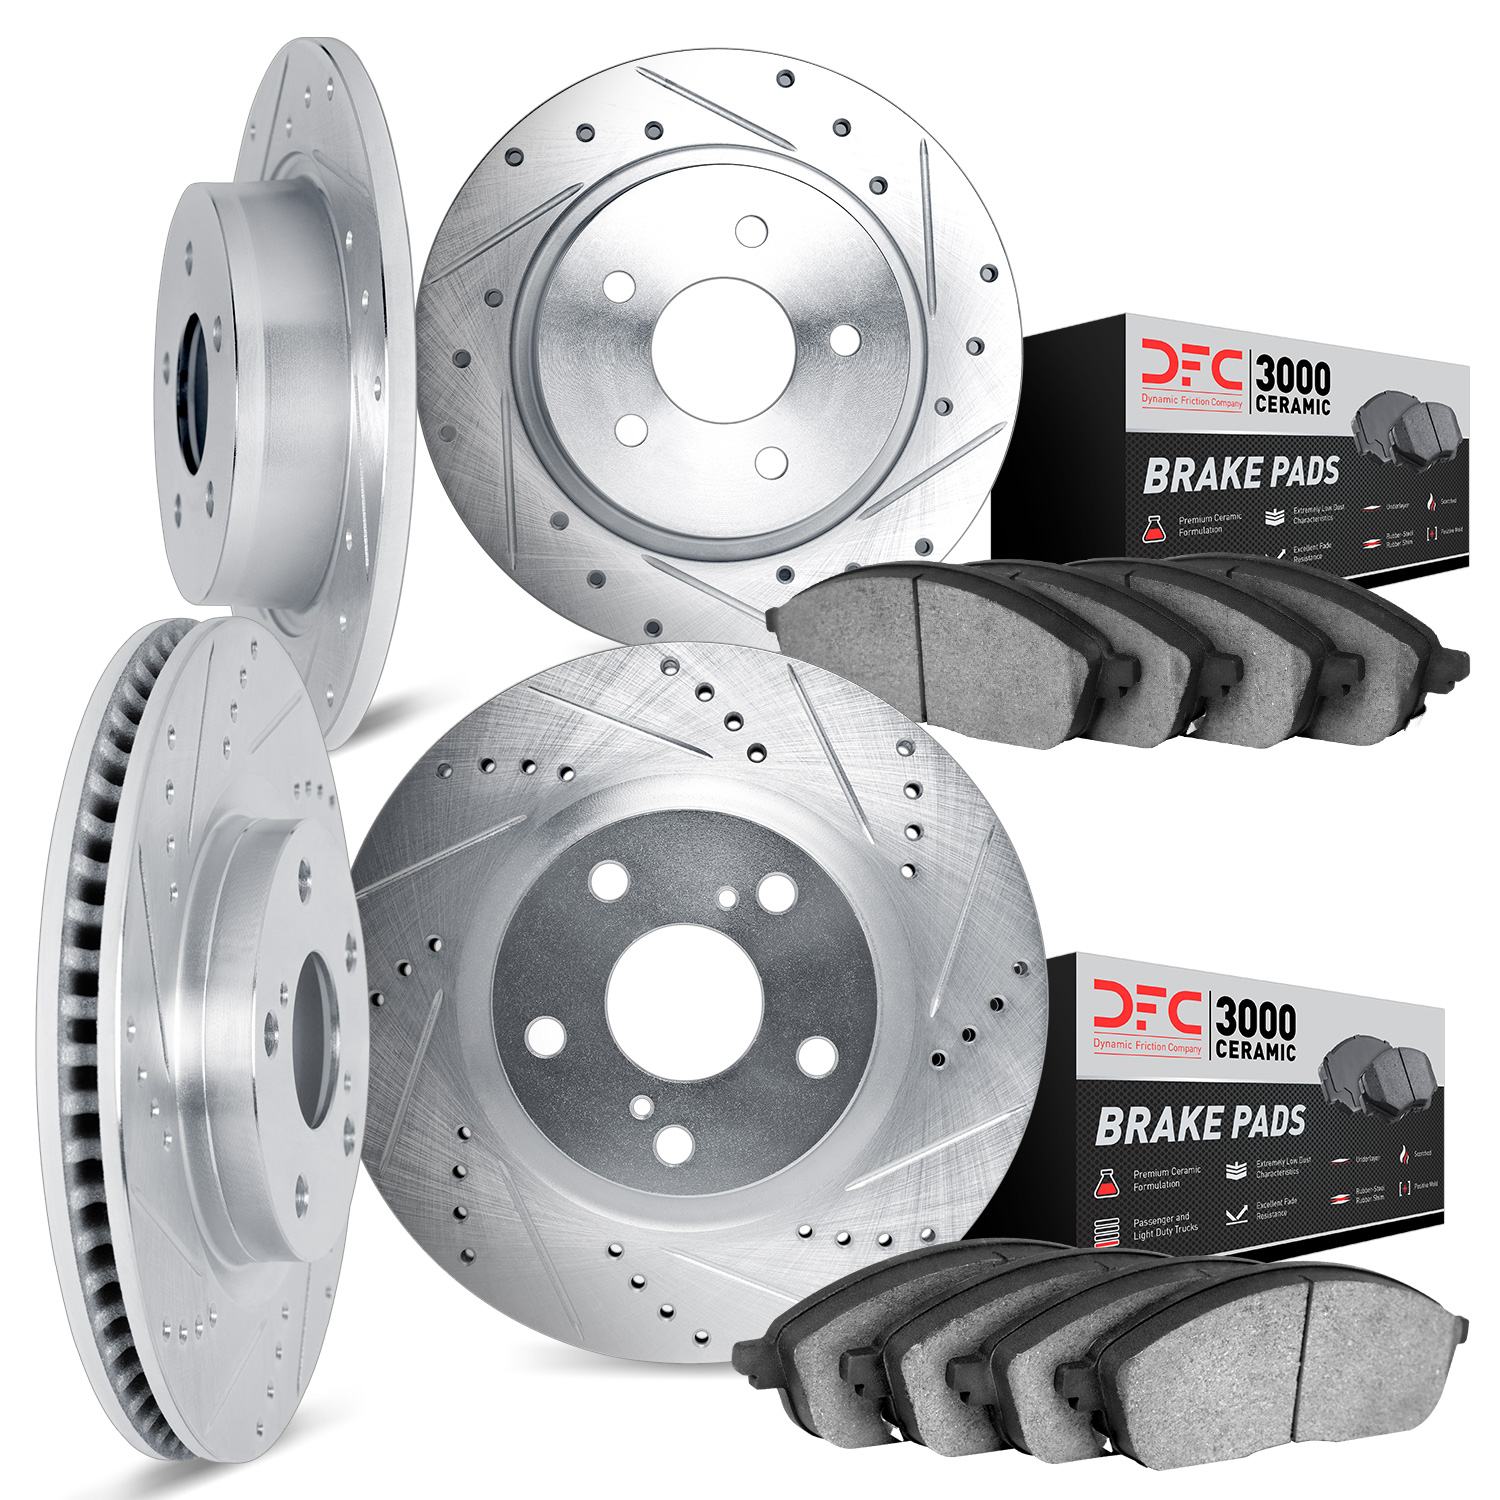 7304-73043 Drilled/Slotted Brake Rotor with 3000-Series Ceramic Brake Pads Kit [Silver], 1998-2001 Audi/Volkswagen, Position: Fr